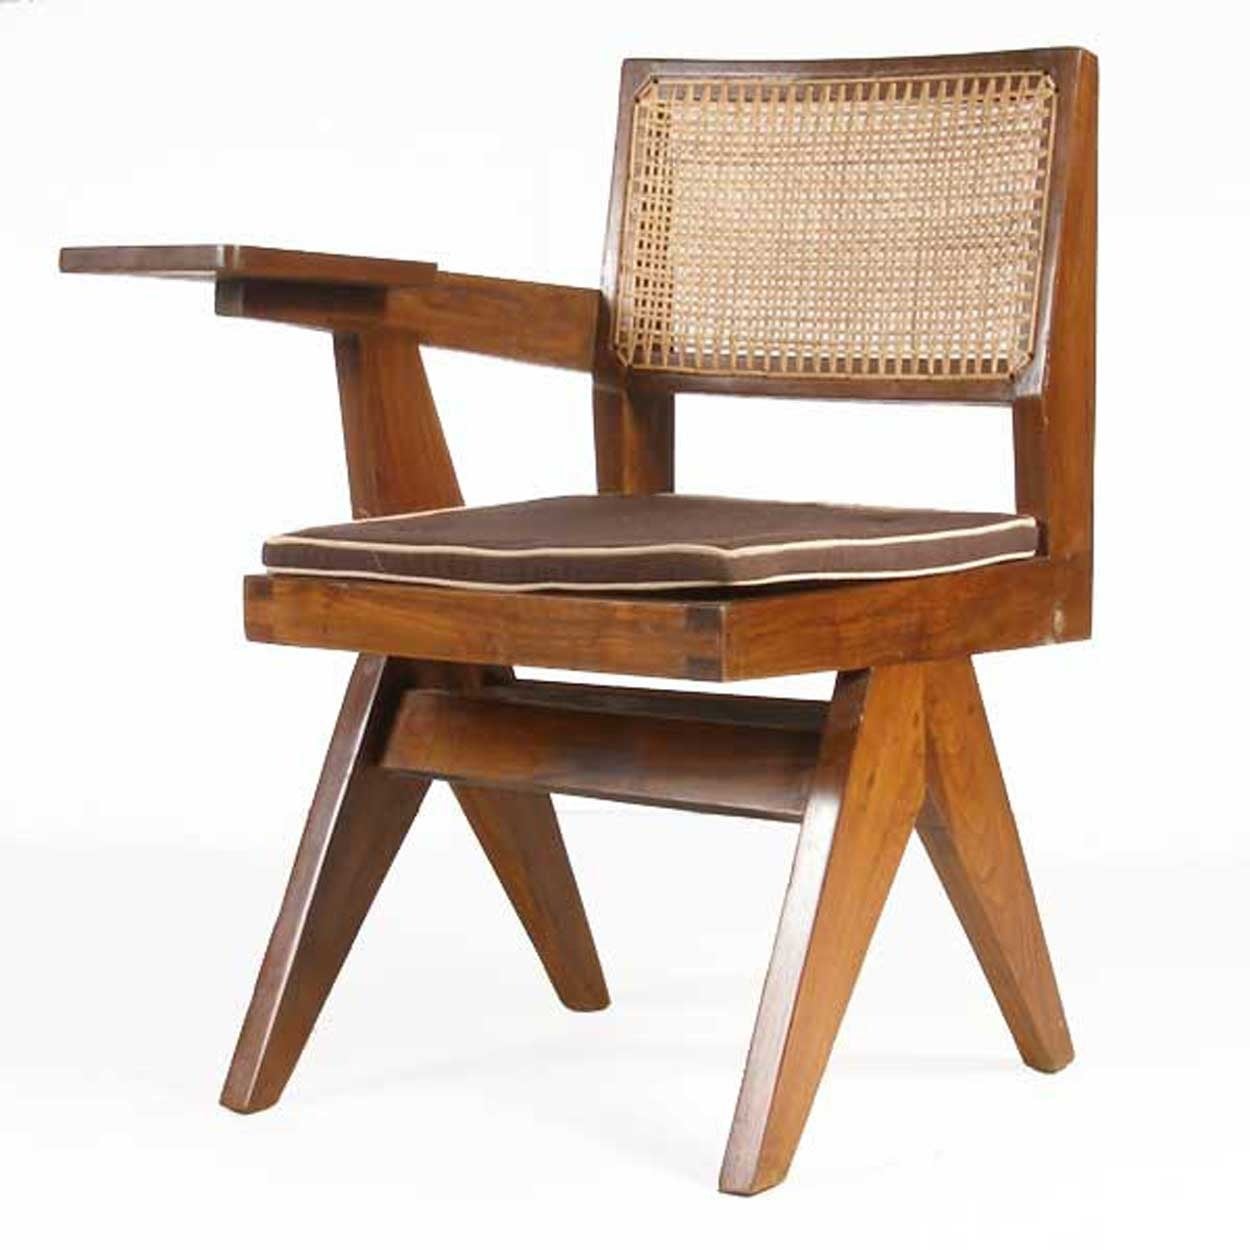 Mid-Century Modern Pierre Jeanneret Caned Teak Class Chair from Chandigarh, India For Sale